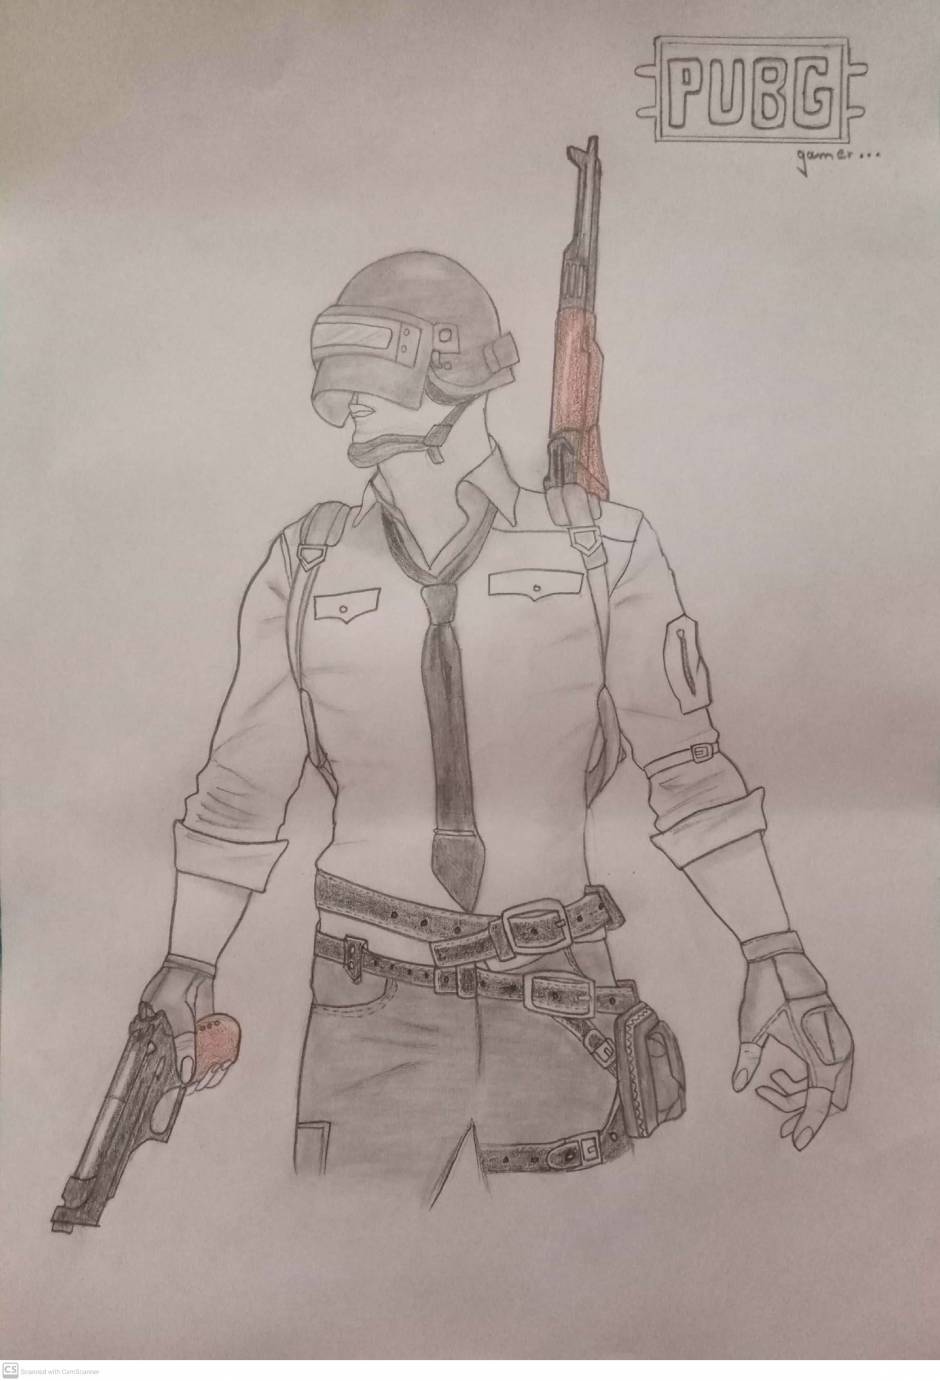 PENCIL SKETCH 04 ] || PUBG MOBILE CHARACTER SKETCH || ART WASHES AWAY FROM  THE SOUL THE DUST OF EVERYDAY LIFE — Hive